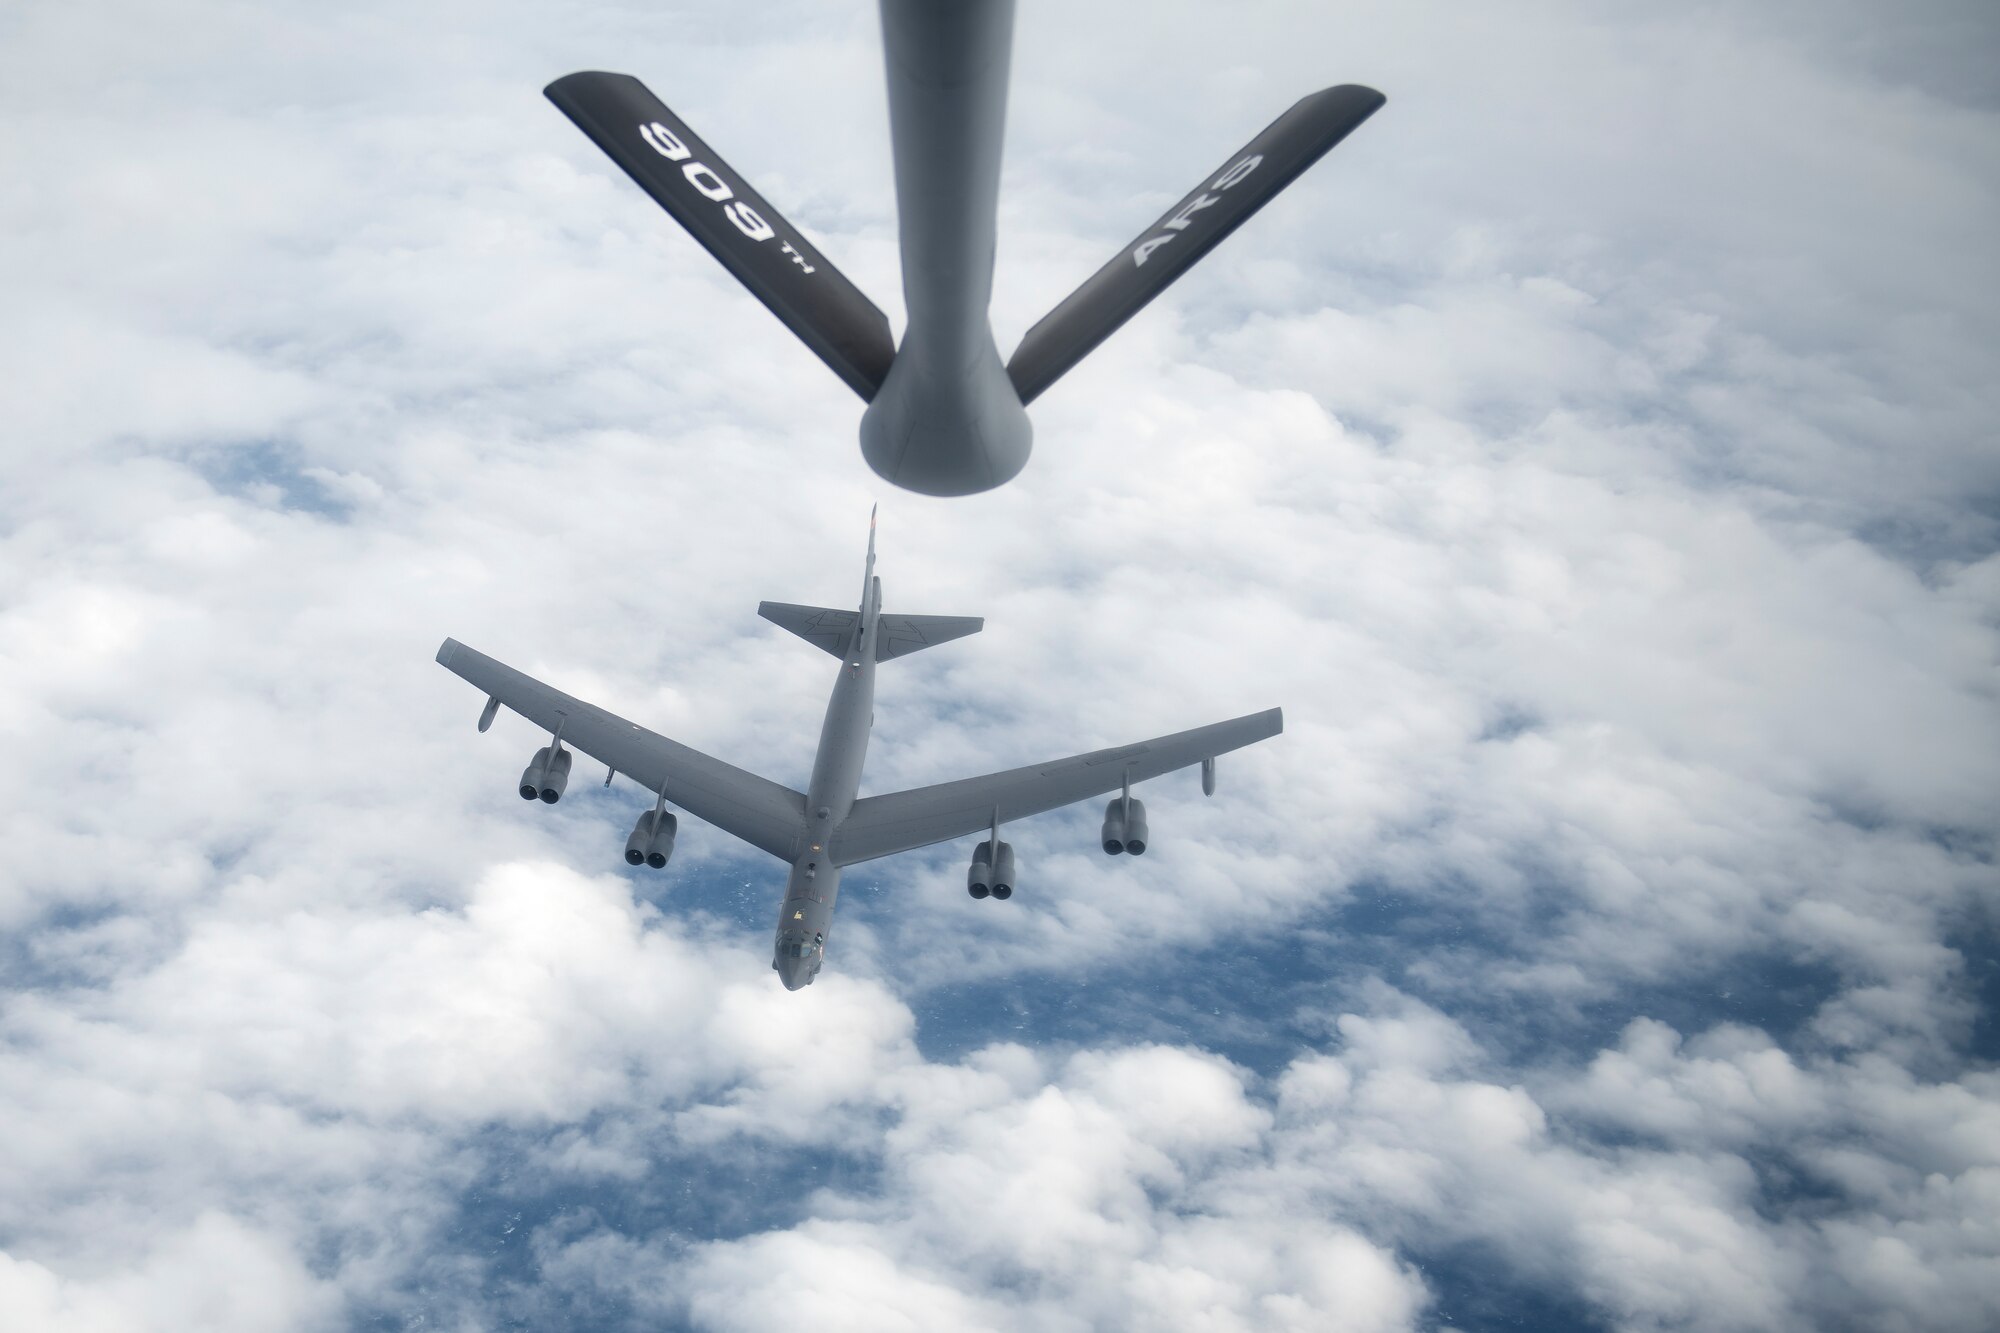 A U.S. Air Force 5th Bomb Wing B-52H Stratofortress departs after receiving fuel from a 909th Air Refueling Squadron KC-135 Stratotanker over the Pacific Ocean, Oct. 27, 2022. Aerial refueling capabilities extend airborne training time and combat radius, ensuring U.S. and Allied nation aircraft are postured to maintain regional peace and stability within the Indo-Pacific area of responsibility. (U.S. Air Force photo by Senior Airman Jessi Roth)